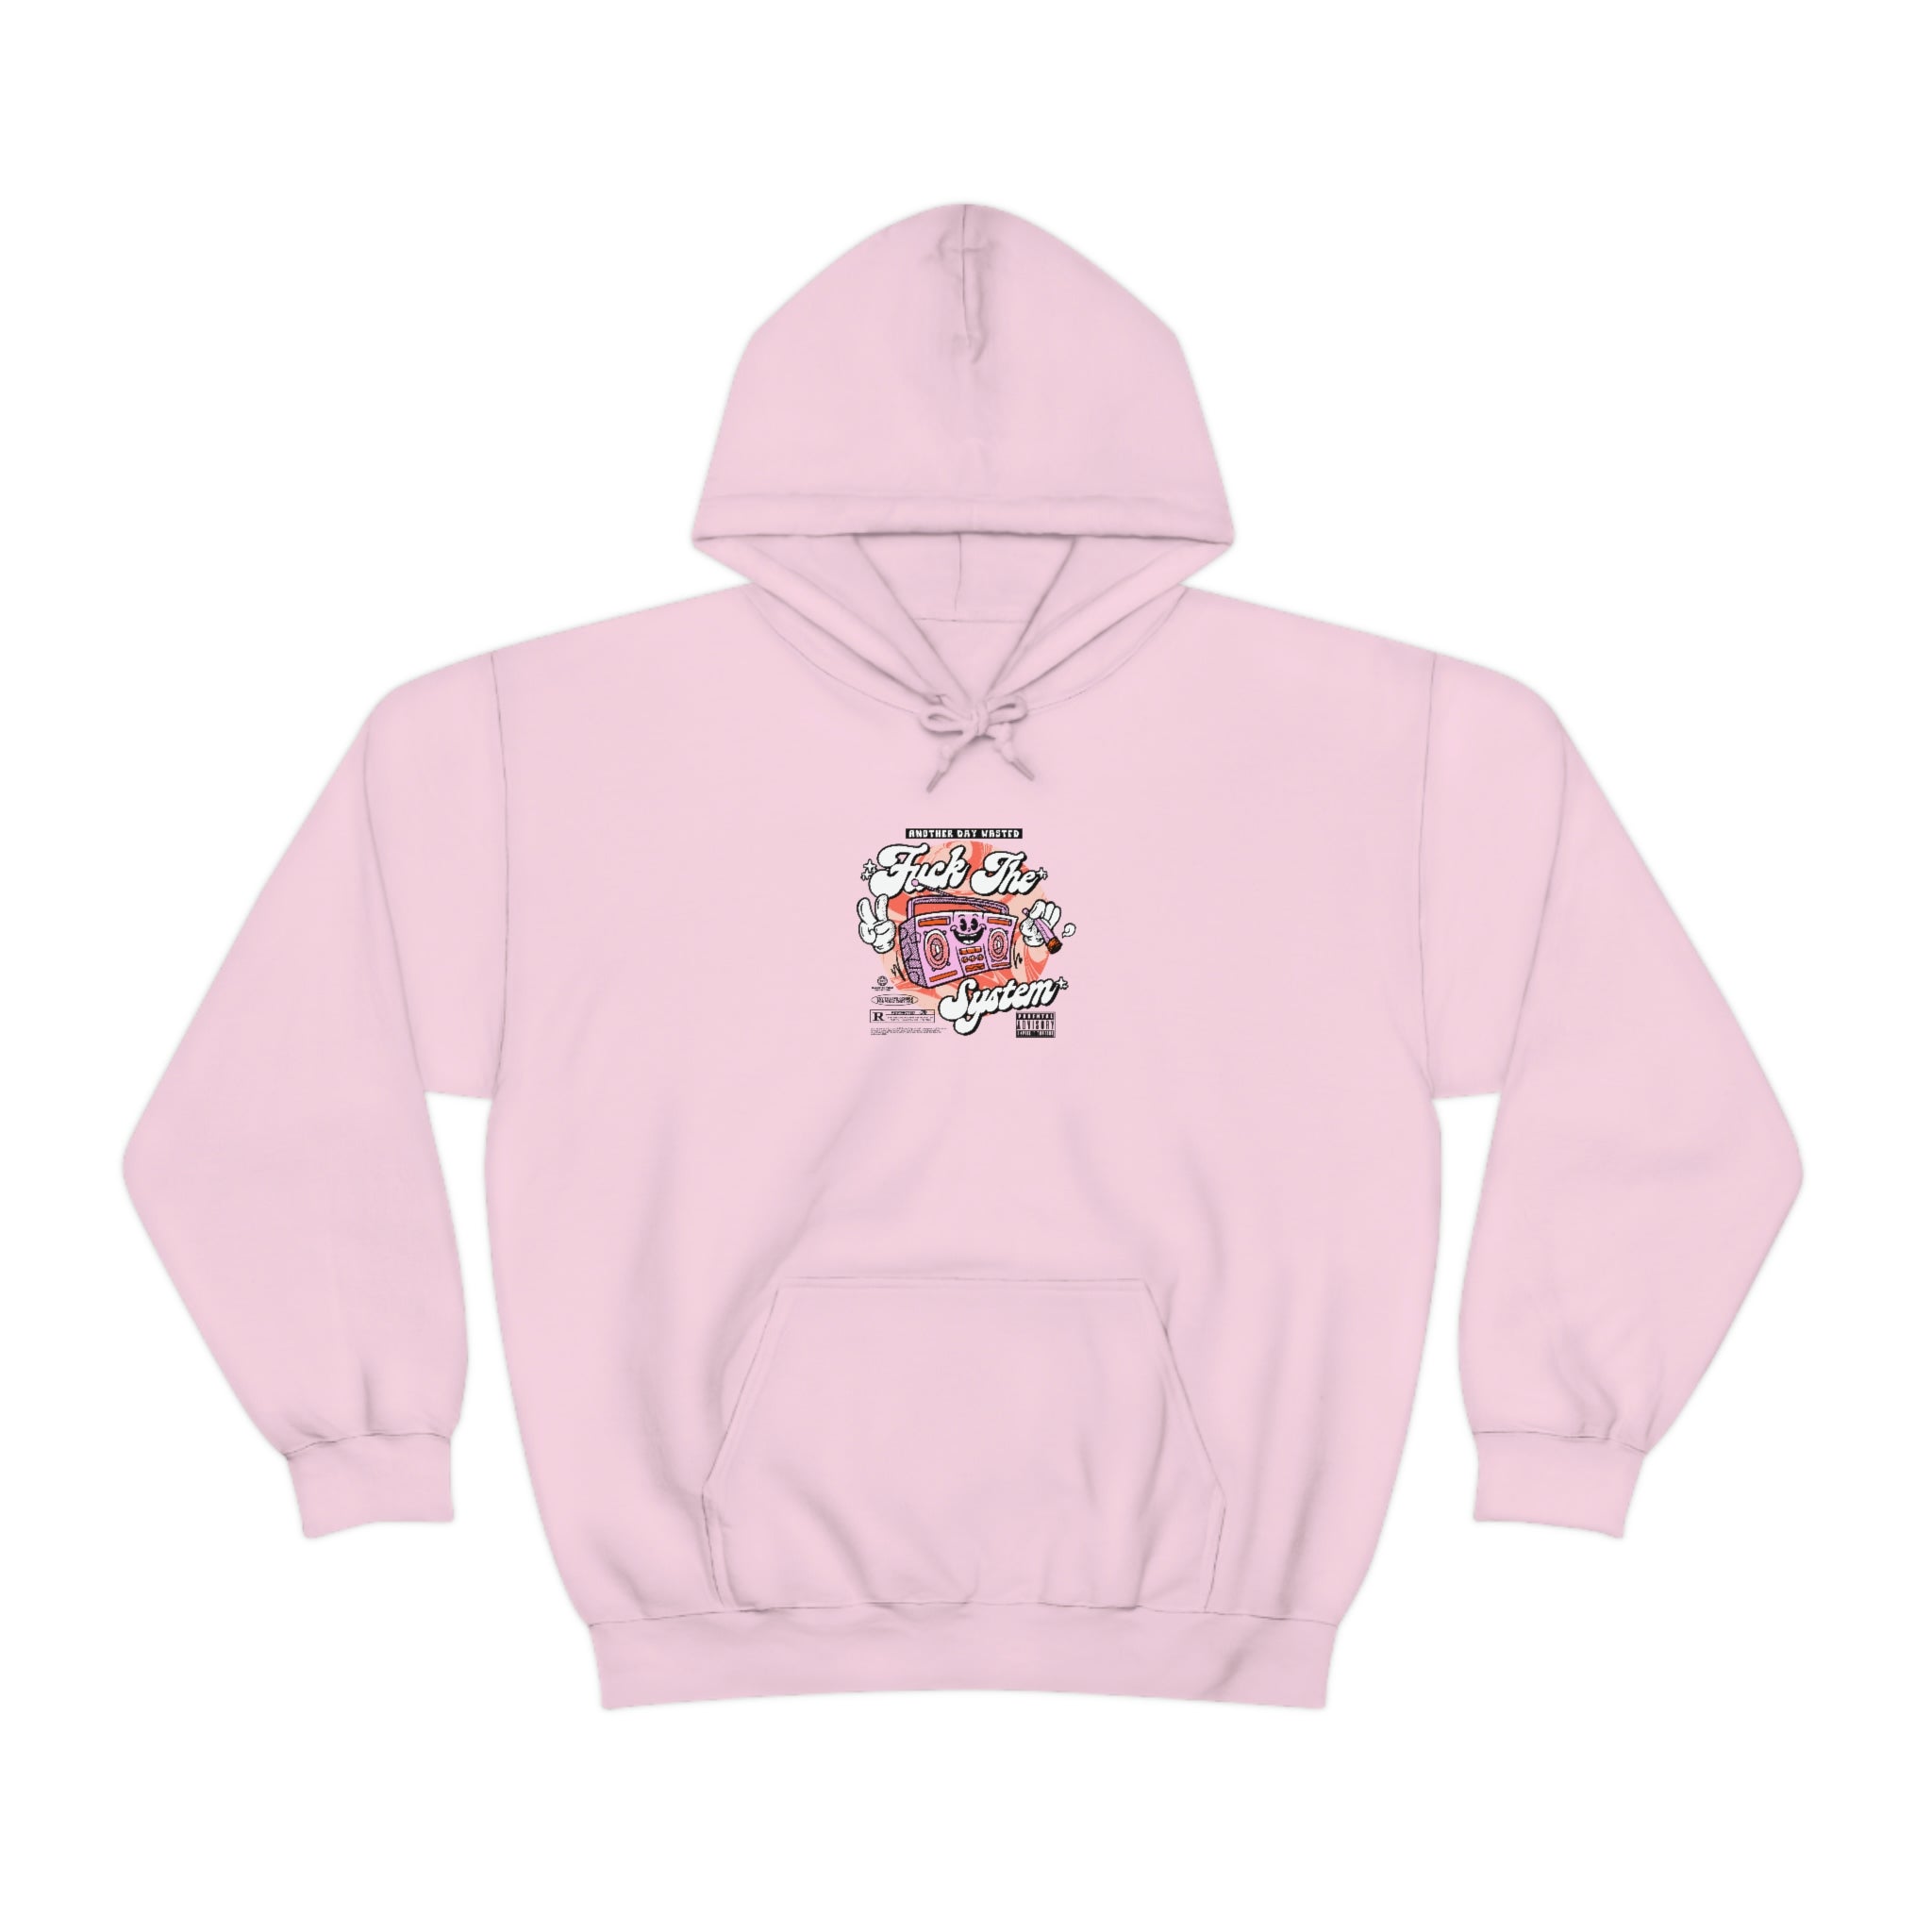 SYSTEM HOODY / PINK